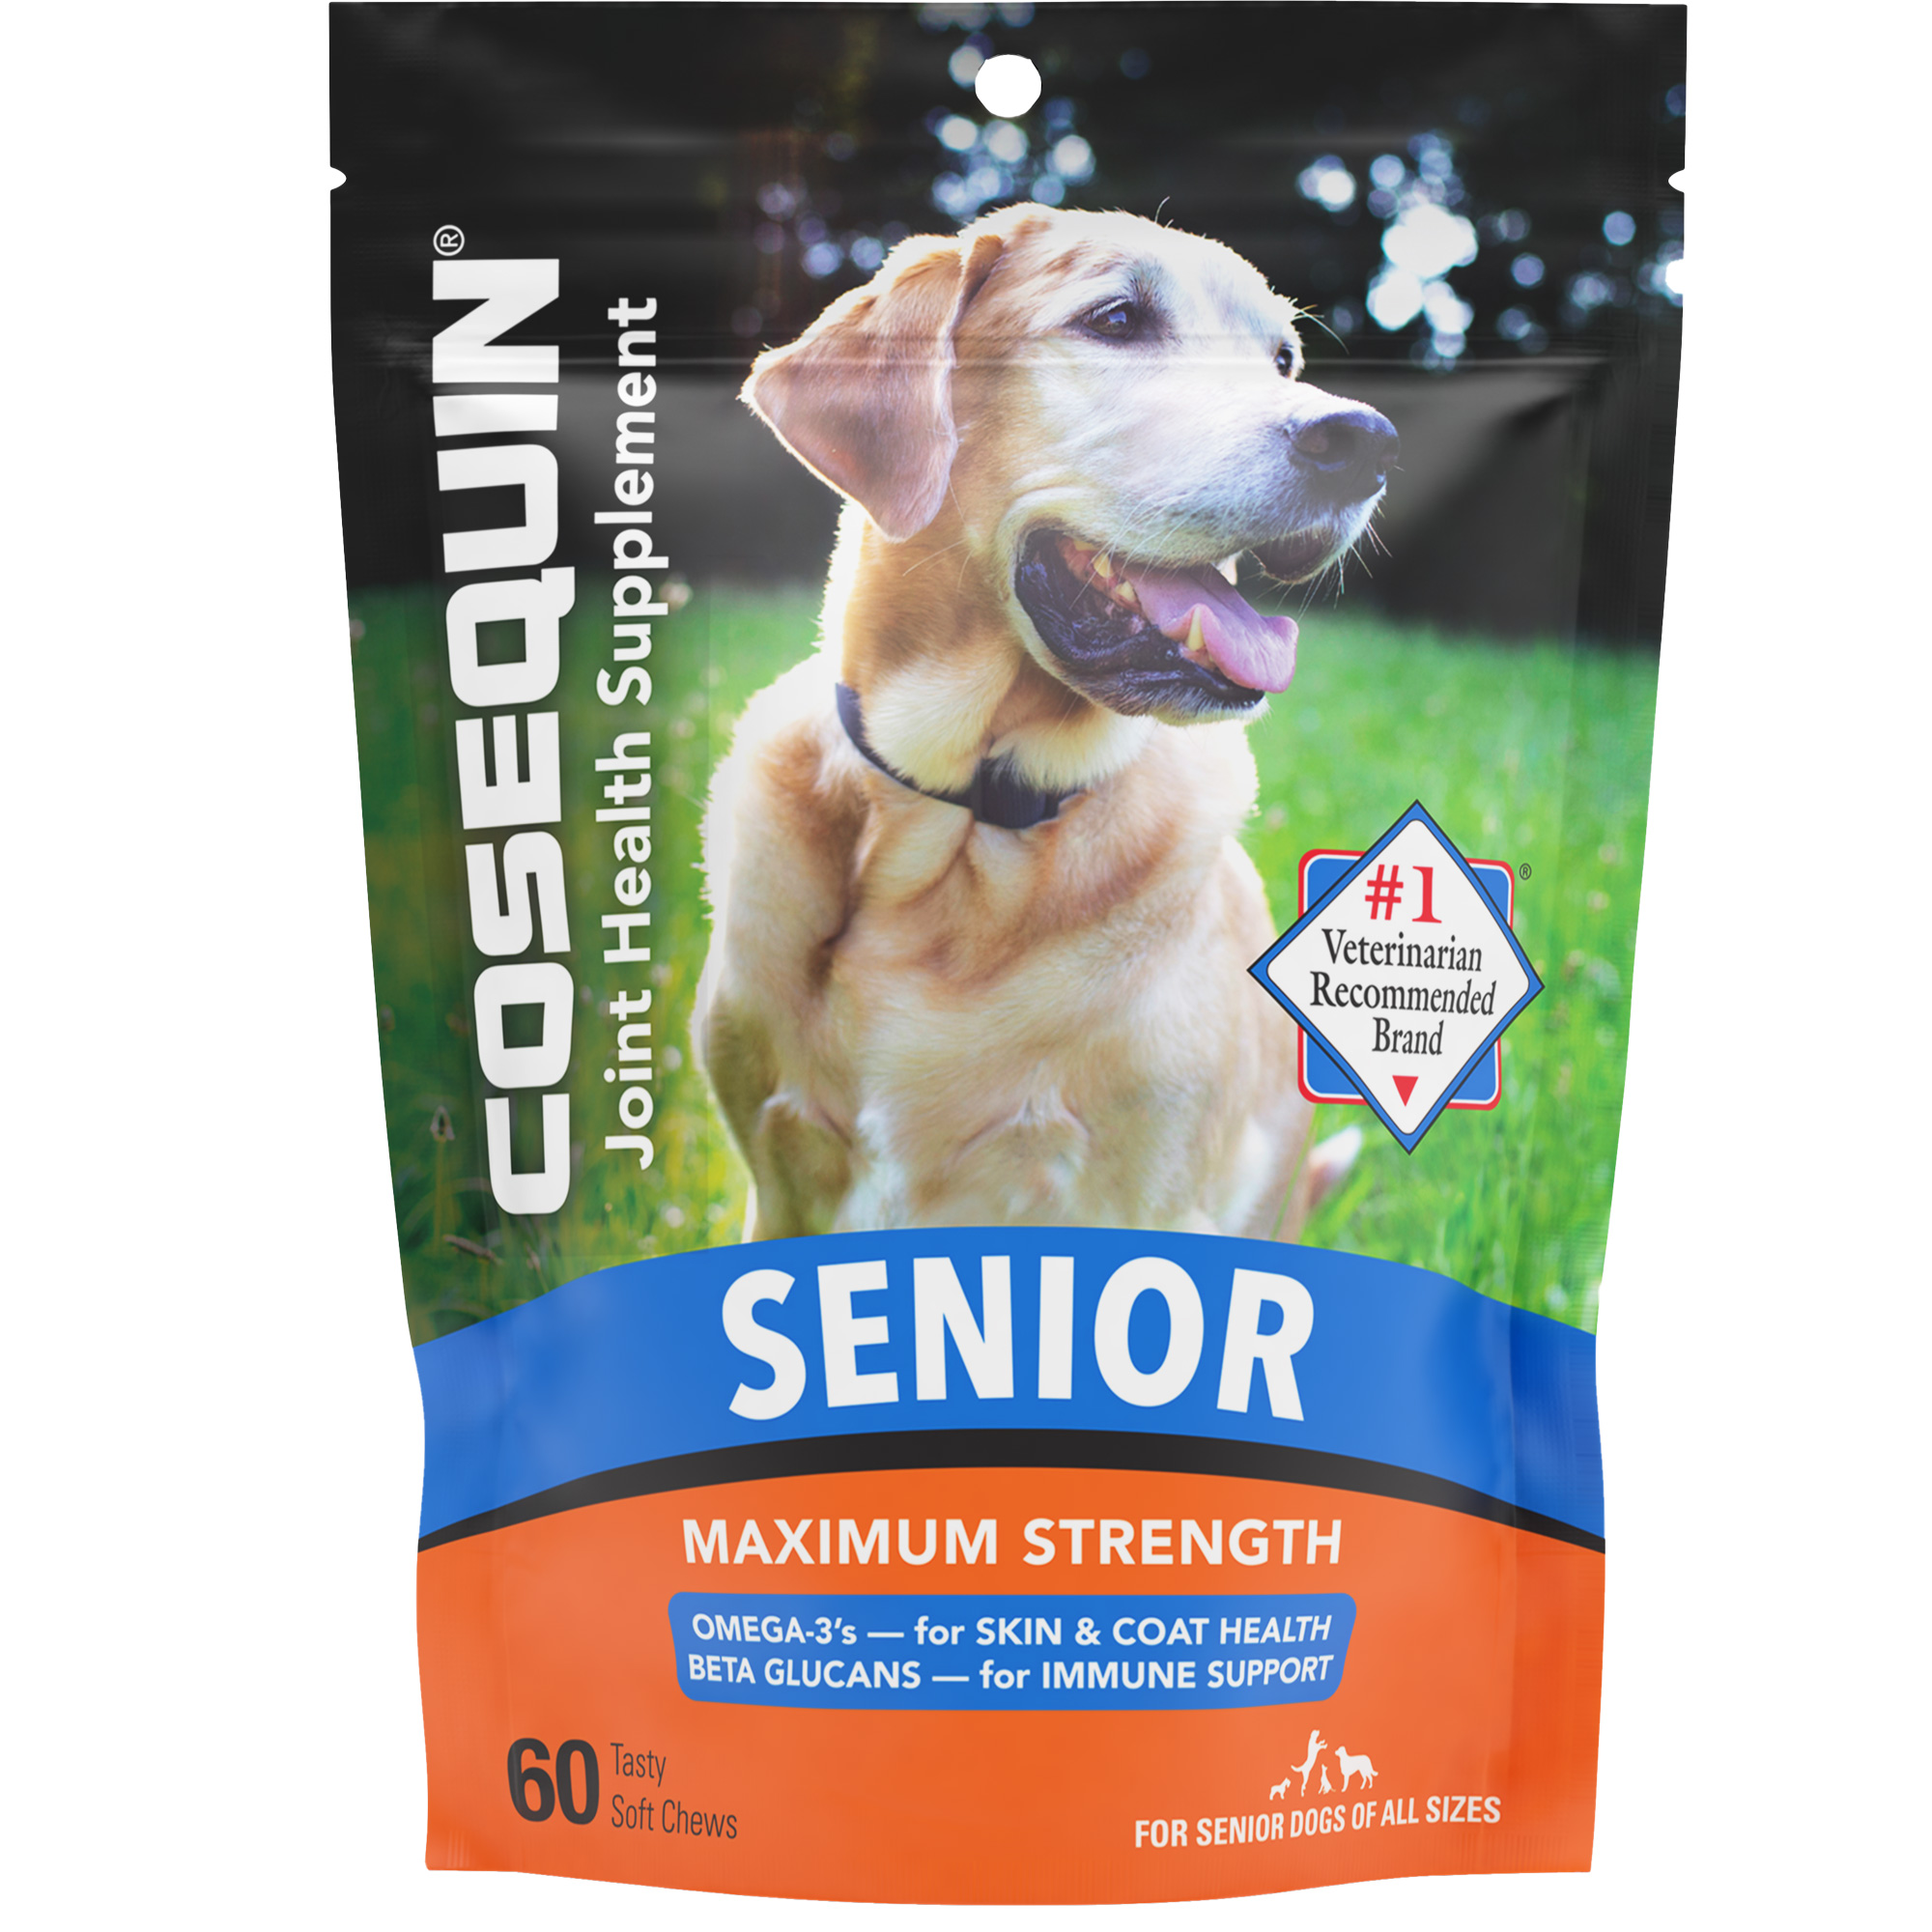 Nutramax Cosequin Senior Joint Health Supplement for Senior Dogs - With Glucosamine, Chondroitin, Omega-3 for Skin and Coat Health and Beta Glucans for Immune Support Usage